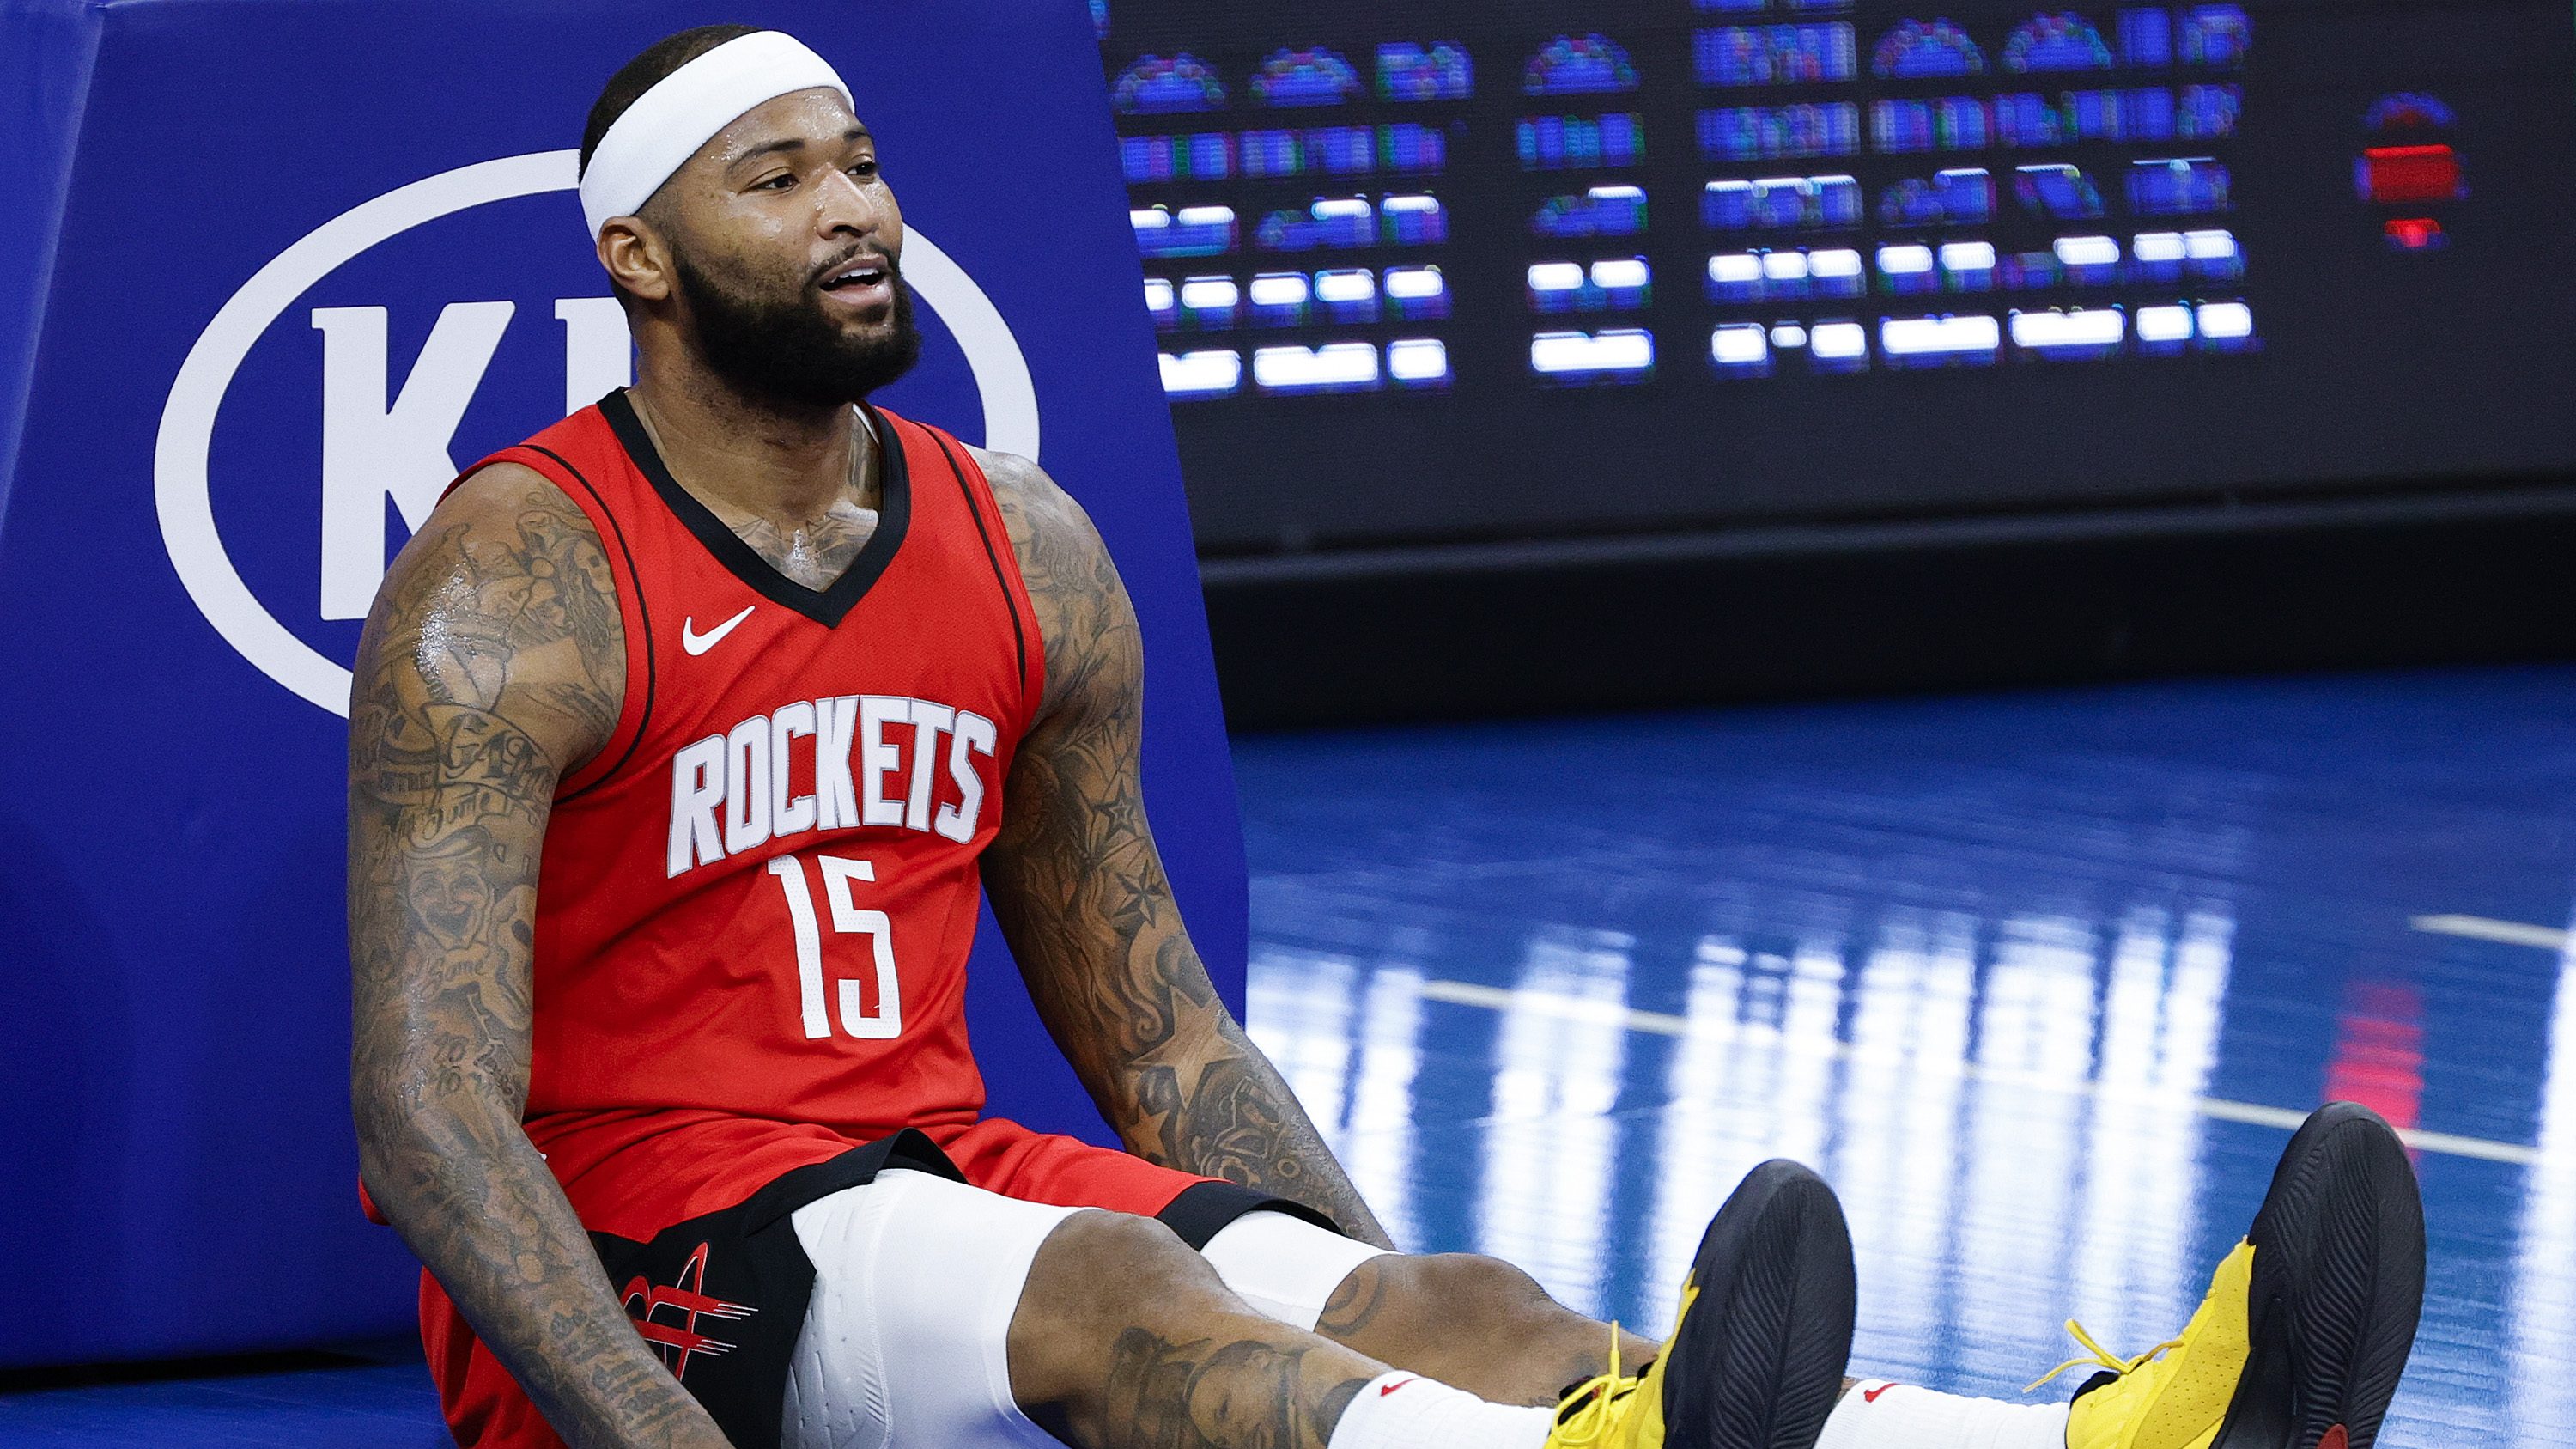 DeMarcus Cousins Has Finally Arrived